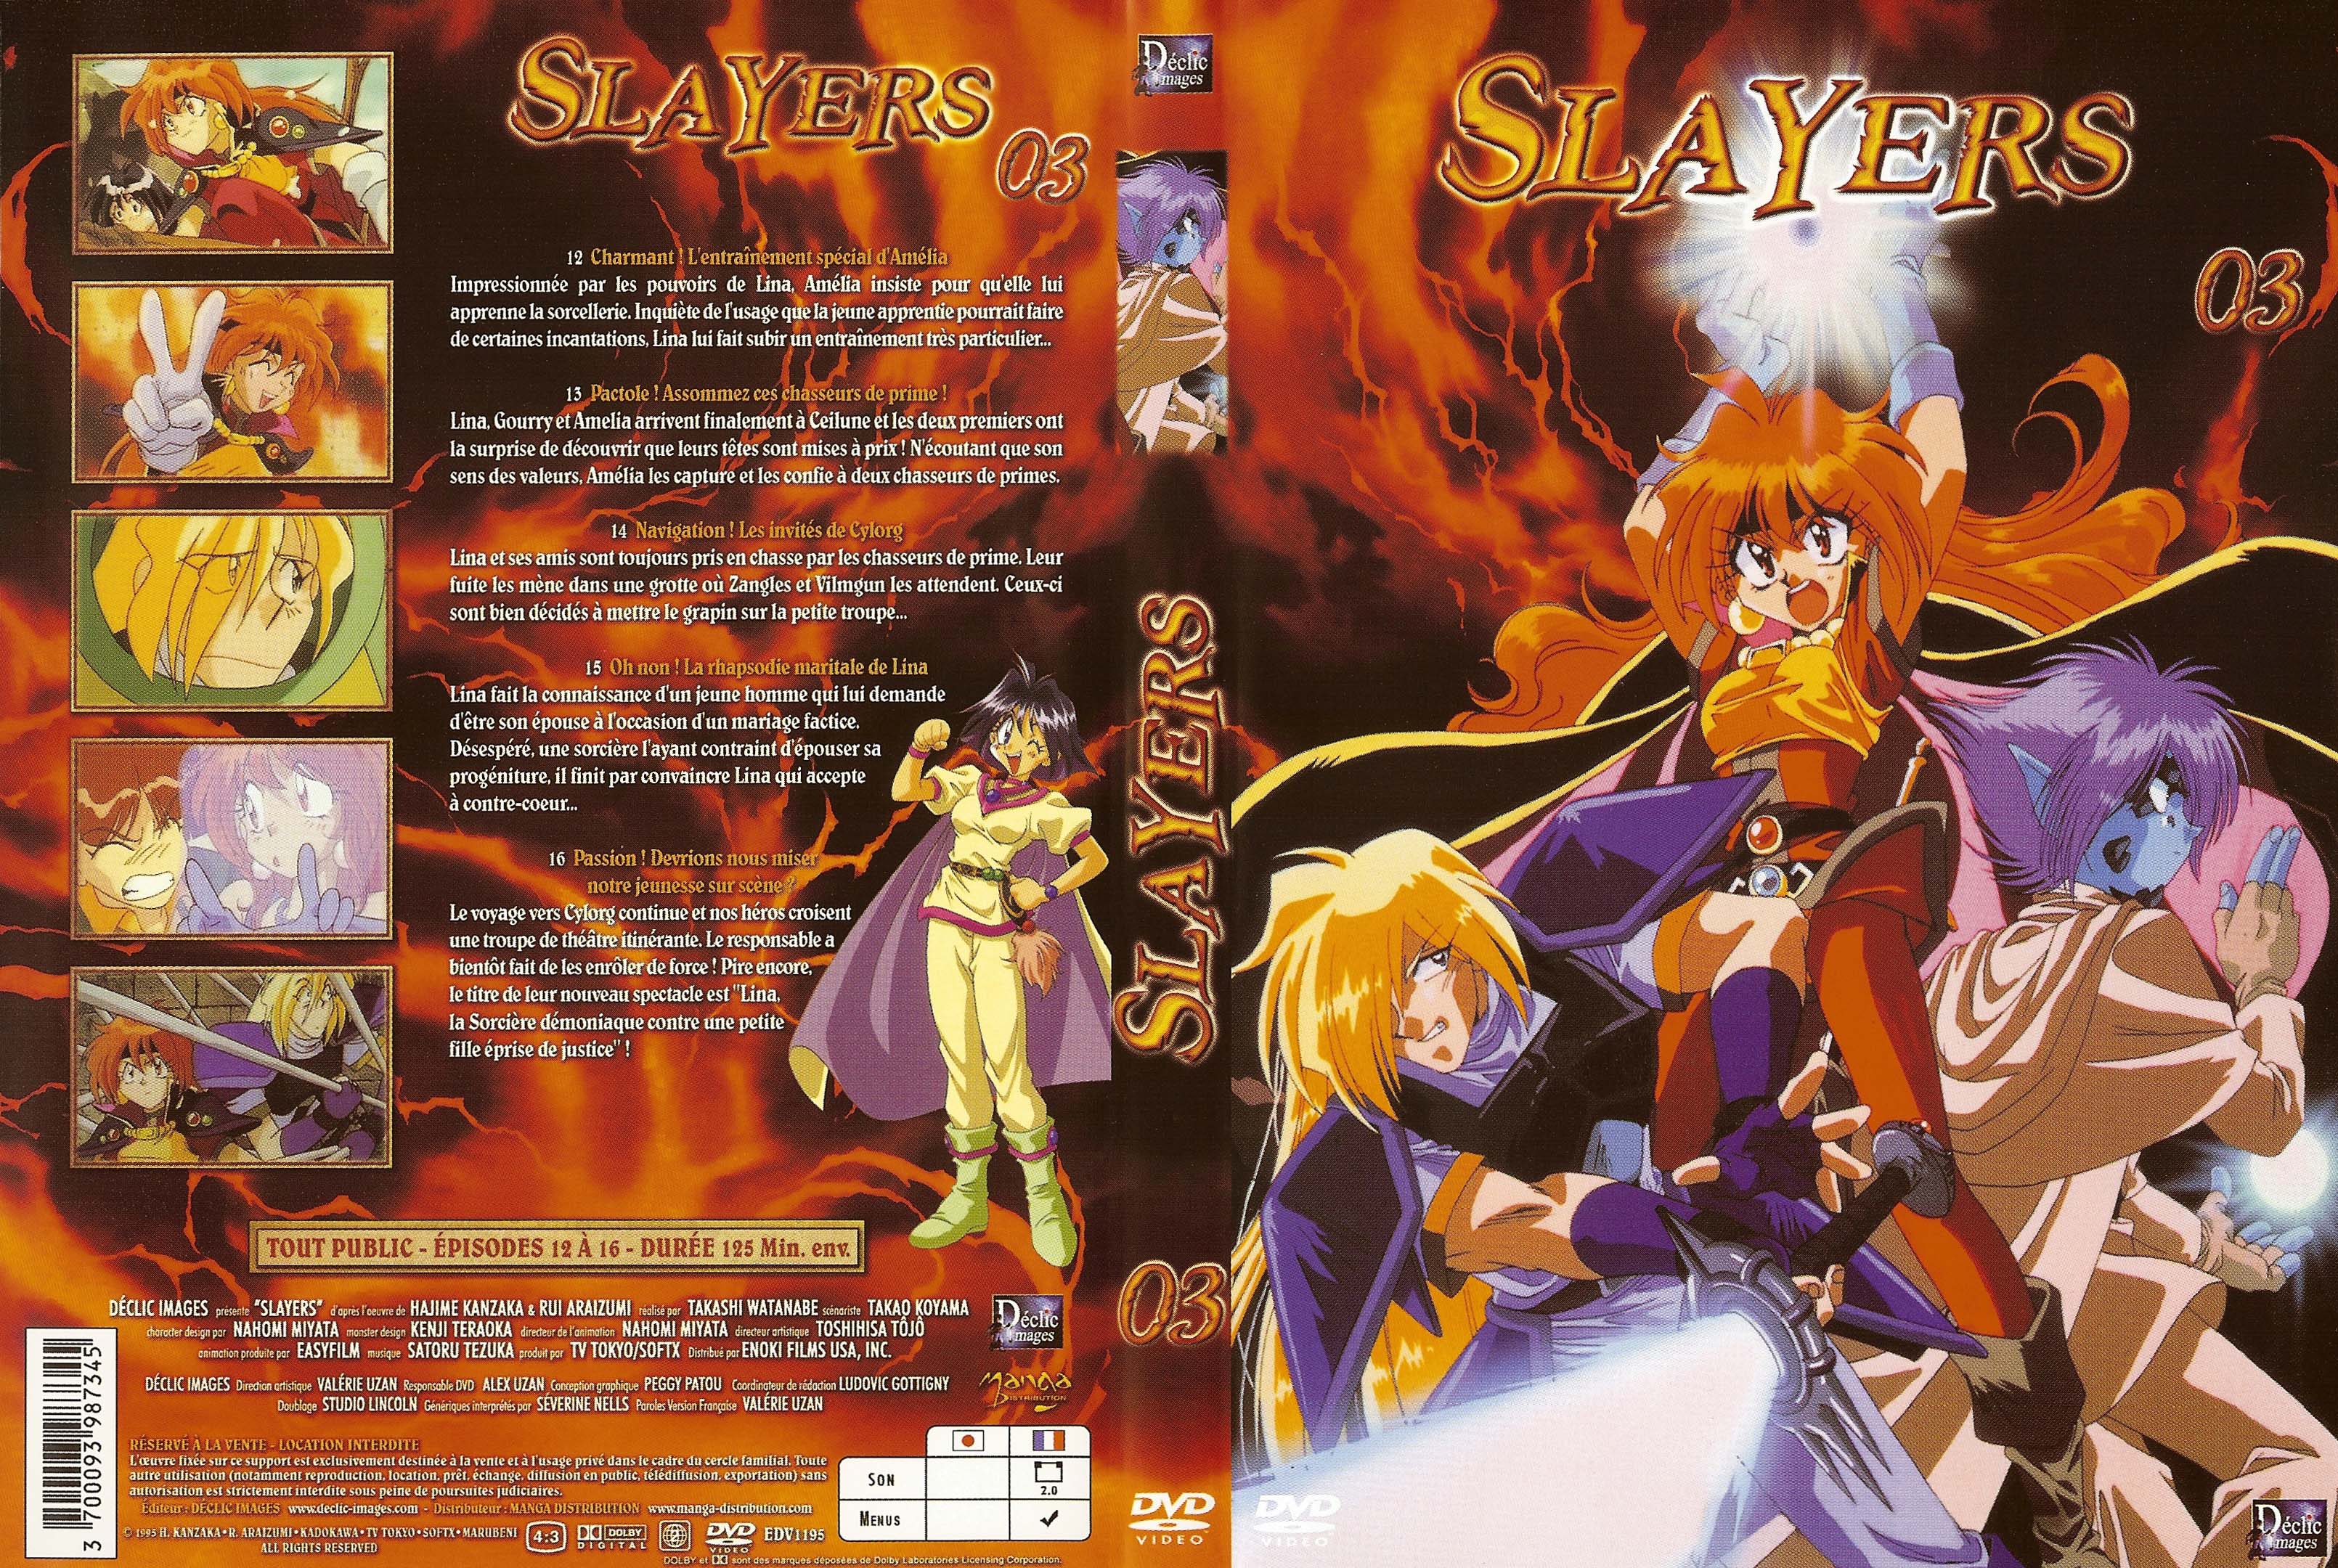 Jaquette DVD Slayers DVD 3